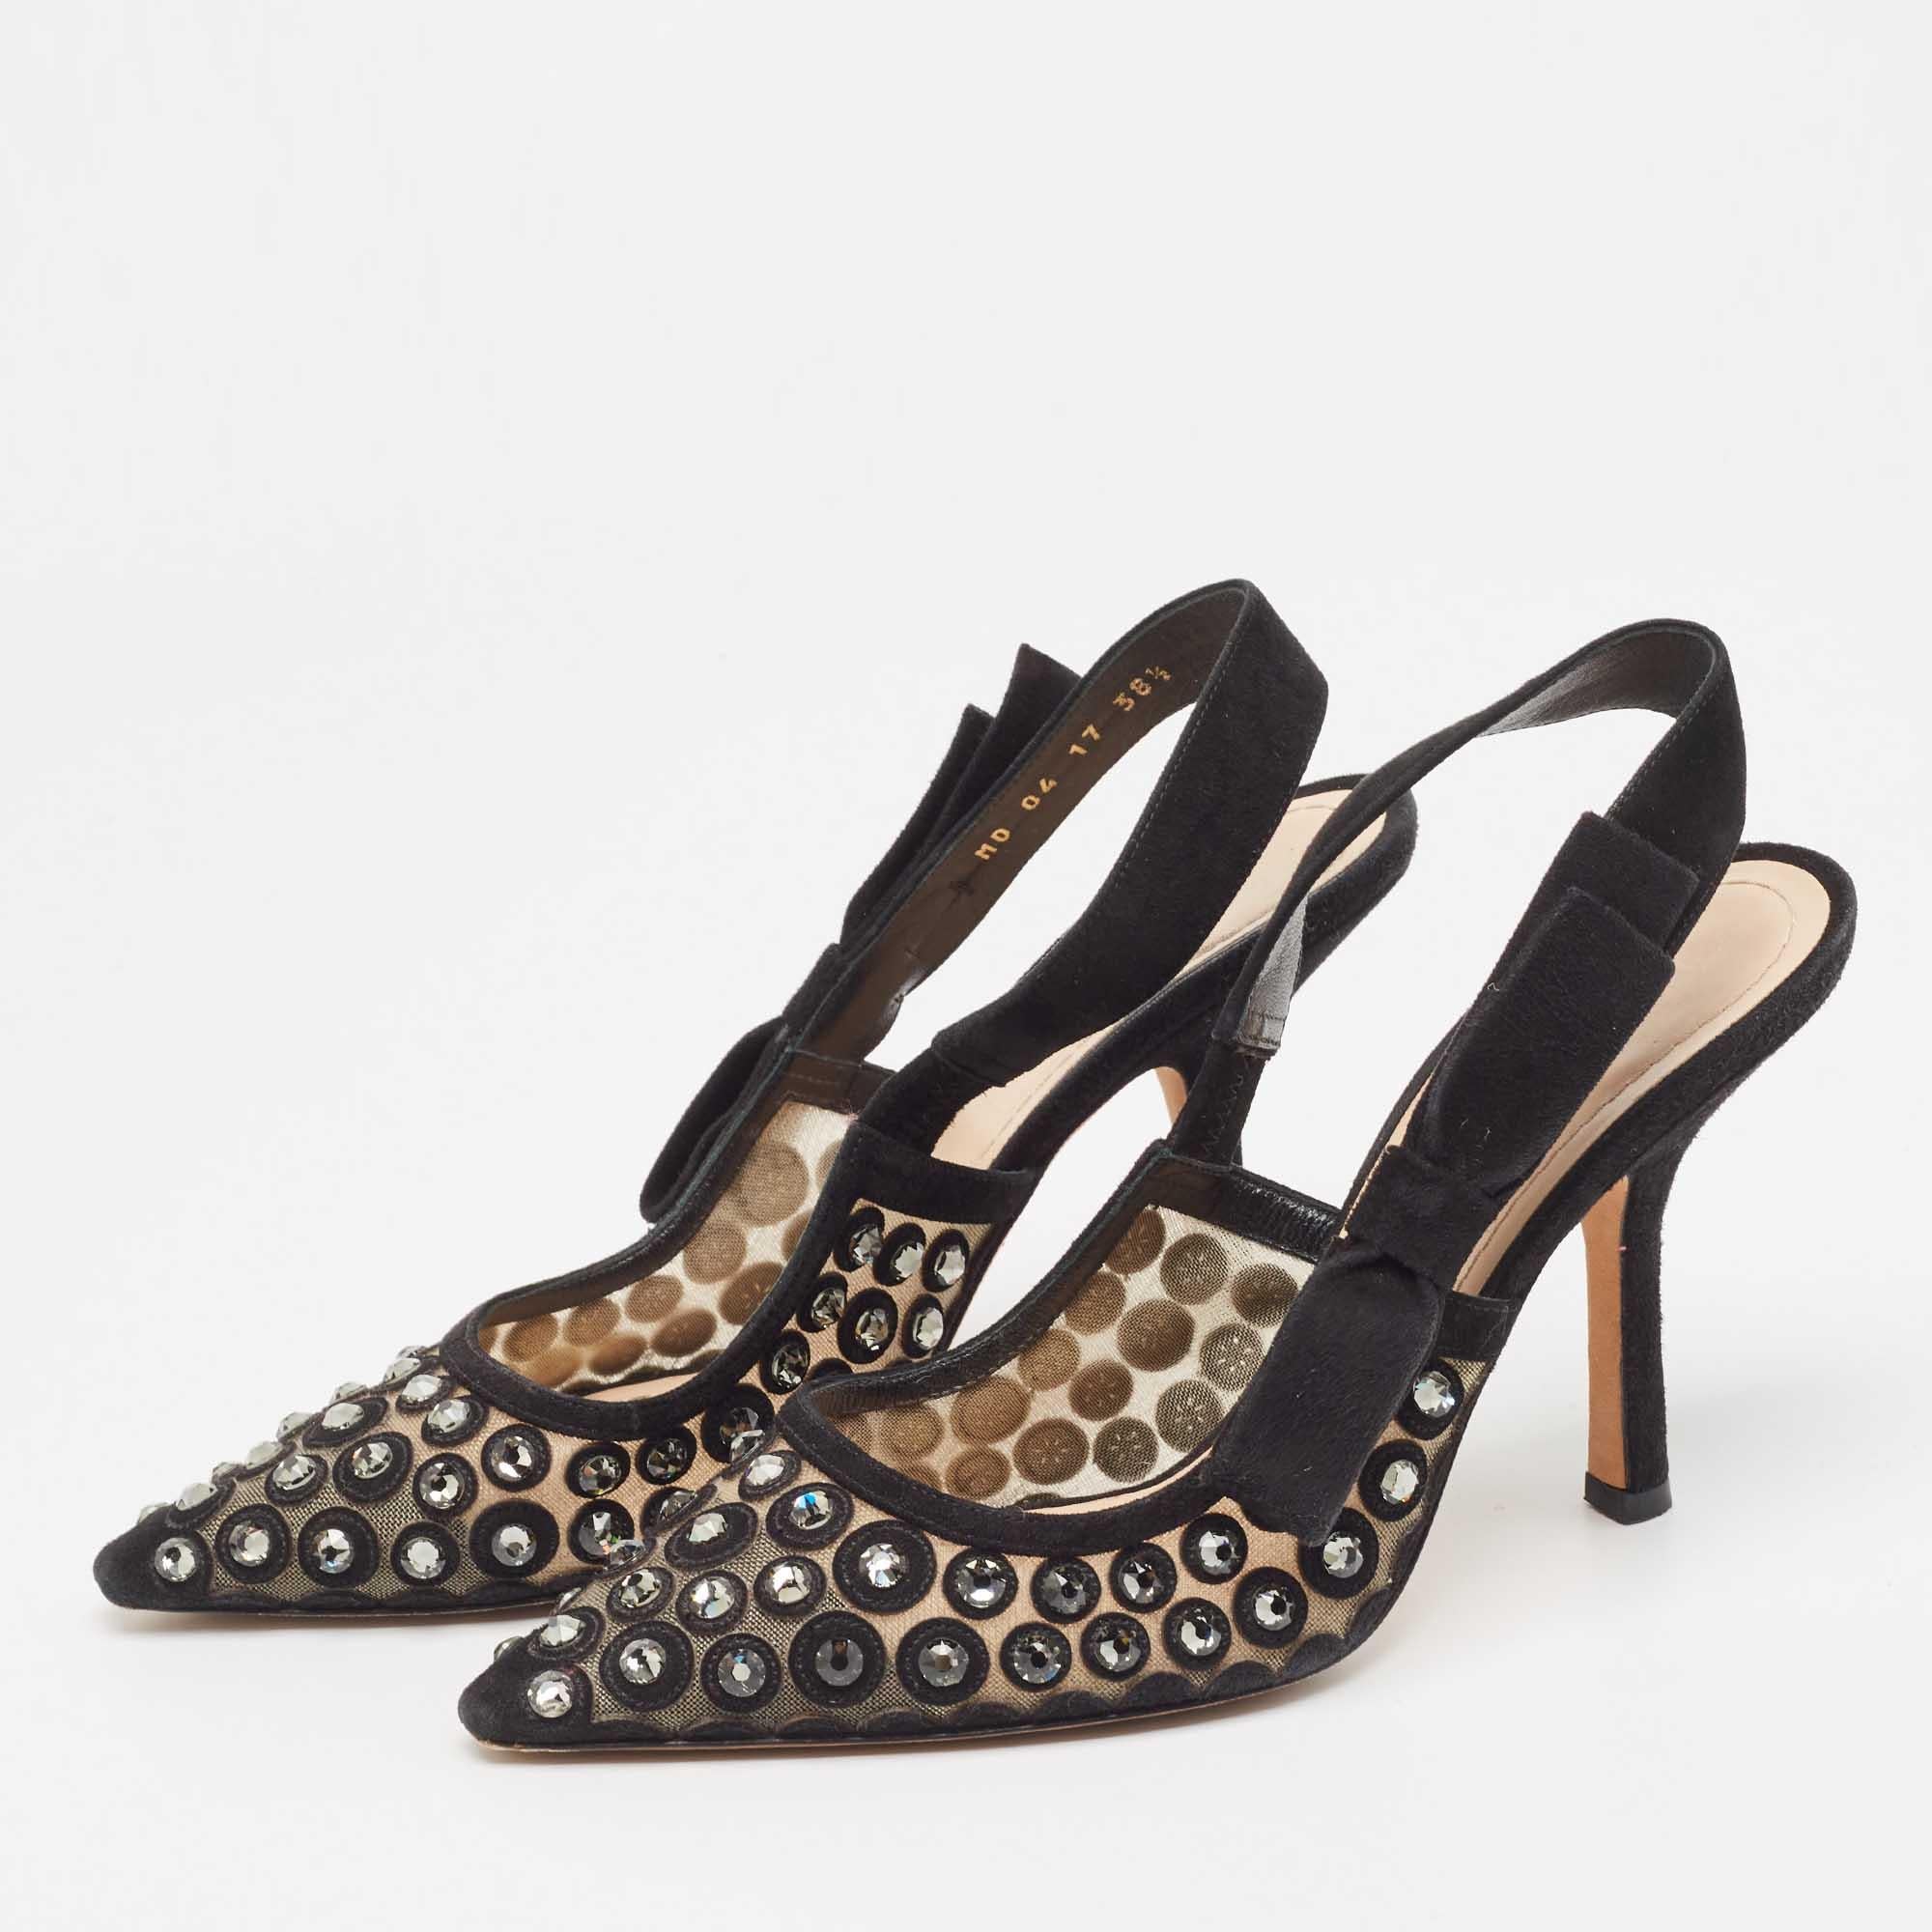 This pair of Dior pumps celebrates femininity like all other designs of the brand. Made from suede and mesh, the creation is decorated with crystal embellishments and the sharp silhouette is balanced on 10cm heels.

